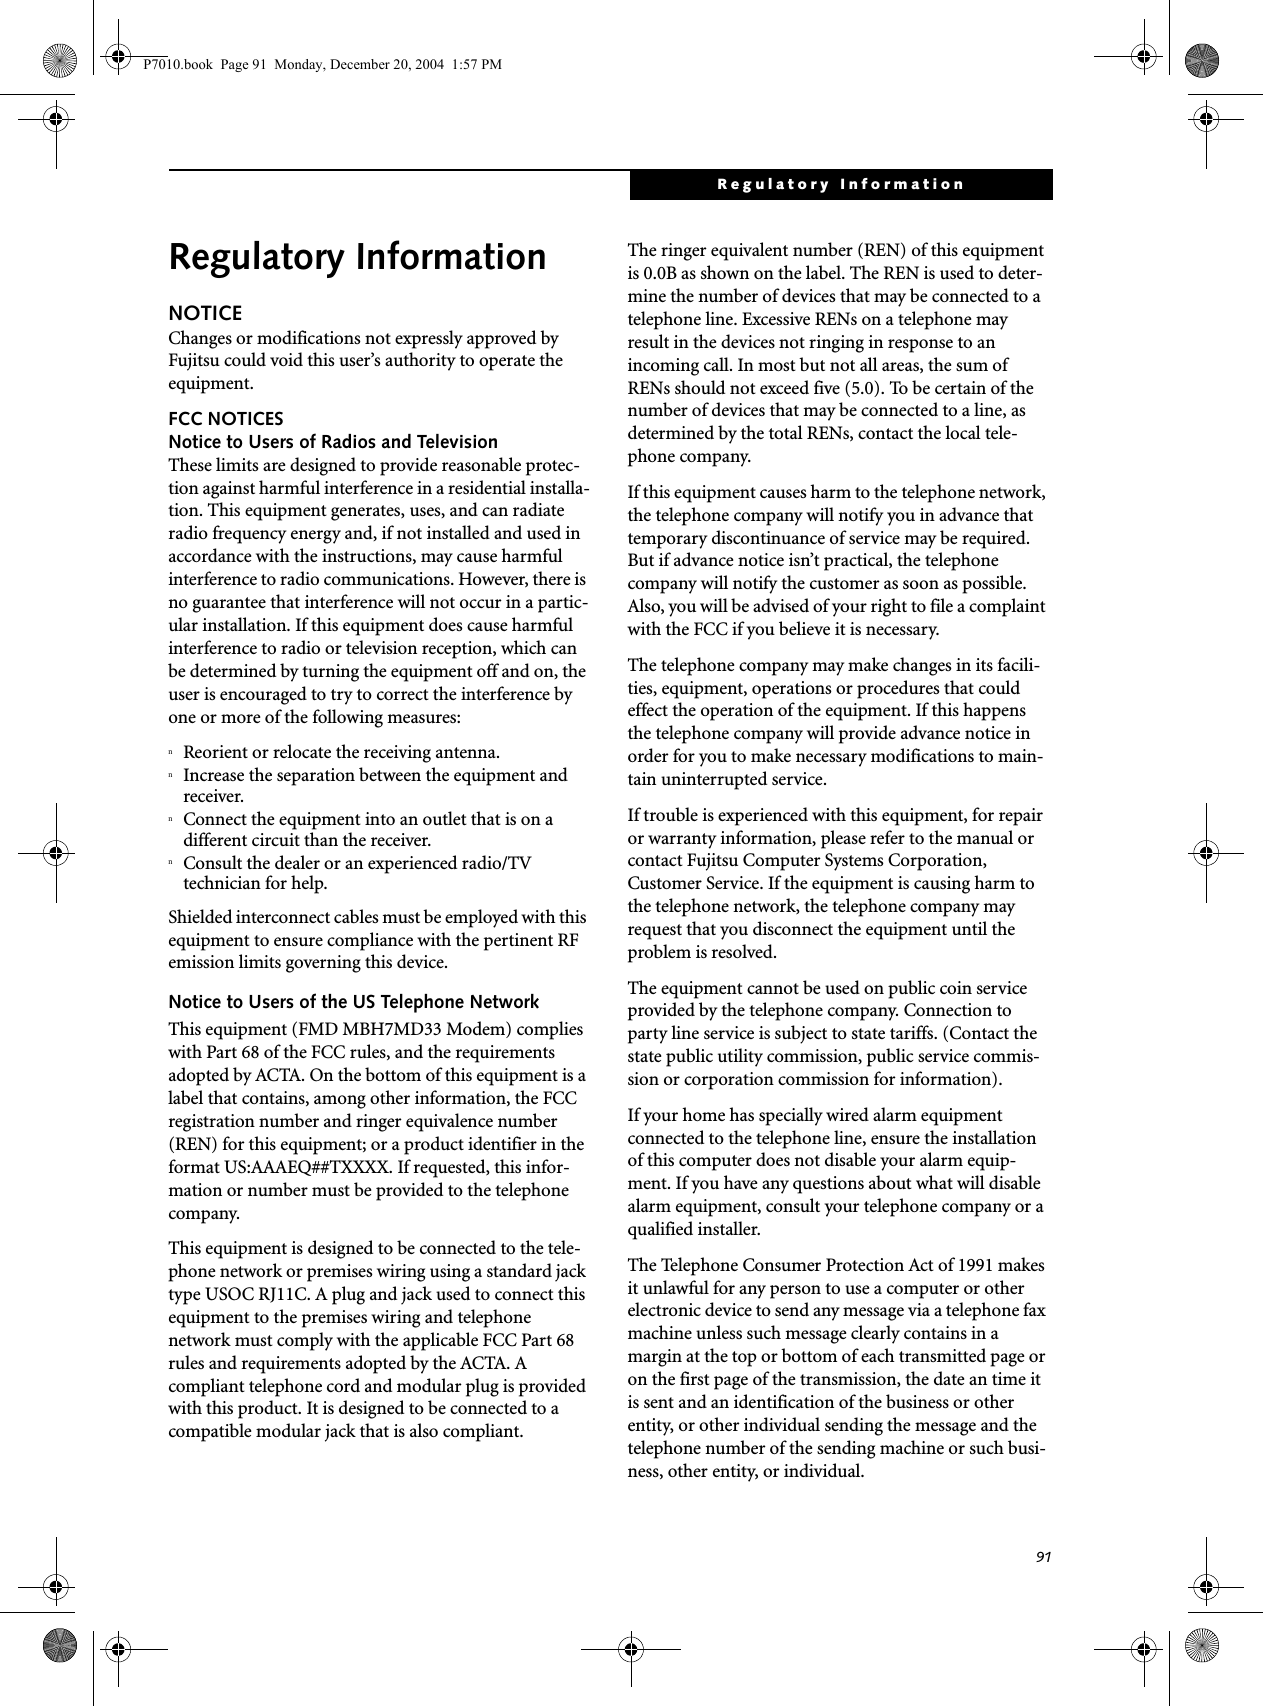 91Regulatory InformationRegulatory InformationNOTICEChanges or modifications not expressly approved by Fujitsu could void this user’s authority to operate the equipment.FCC NOTICESNotice to Users of Radios and TelevisionThese limits are designed to provide reasonable protec-tion against harmful interference in a residential installa-tion. This equipment generates, uses, and can radiate radio frequency energy and, if not installed and used in accordance with the instructions, may cause harmful interference to radio communications. However, there is no guarantee that interference will not occur in a partic-ular installation. If this equipment does cause harmful interference to radio or television reception, which can be determined by turning the equipment off and on, the user is encouraged to try to correct the interference by one or more of the following measures:nReorient or relocate the receiving antenna.nIncrease the separation between the equipment and receiver.nConnect the equipment into an outlet that is on a different circuit than the receiver.nConsult the dealer or an experienced radio/TVtechnician for help.Shielded interconnect cables must be employed with this equipment to ensure compliance with the pertinent RF emission limits governing this device. Notice to Users of the US Telephone NetworkThis equipment (FMD MBH7MD33 Modem) complies with Part 68 of the FCC rules, and the requirements adopted by ACTA. On the bottom of this equipment is a label that contains, among other information, the FCC registration number and ringer equivalence number (REN) for this equipment; or a product identifier in the format US:AAAEQ##TXXXX. If requested, this infor-mation or number must be provided to the telephone company.This equipment is designed to be connected to the tele-phone network or premises wiring using a standard jack type USOC RJ11C. A plug and jack used to connect this equipment to the premises wiring and telephone network must comply with the applicable FCC Part 68 rules and requirements adopted by the ACTA. A compliant telephone cord and modular plug is provided with this product. It is designed to be connected to a compatible modular jack that is also compliant.The ringer equivalent number (REN) of this equipment is 0.0B as shown on the label. The REN is used to deter-mine the number of devices that may be connected to a telephone line. Excessive RENs on a telephone may result in the devices not ringing in response to an incoming call. In most but not all areas, the sum of RENs should not exceed five (5.0). To be certain of the number of devices that may be connected to a line, as determined by the total RENs, contact the local tele-phone company. If this equipment causes harm to the telephone network, the telephone company will notify you in advance that temporary discontinuance of service may be required. But if advance notice isn’t practical, the telephone company will notify the customer as soon as possible. Also, you will be advised of your right to file a complaint with the FCC if you believe it is necessary.The telephone company may make changes in its facili-ties, equipment, operations or procedures that could effect the operation of the equipment. If this happens the telephone company will provide advance notice in order for you to make necessary modifications to main-tain uninterrupted service. If trouble is experienced with this equipment, for repair or warranty information, please refer to the manual or contact Fujitsu Computer Systems Corporation, Customer Service. If the equipment is causing harm to the telephone network, the telephone company may request that you disconnect the equipment until the problem is resolved.The equipment cannot be used on public coin service provided by the telephone company. Connection to party line service is subject to state tariffs. (Contact the state public utility commission, public service commis-sion or corporation commission for information). If your home has specially wired alarm equipment connected to the telephone line, ensure the installation of this computer does not disable your alarm equip-ment. If you have any questions about what will disable alarm equipment, consult your telephone company or a qualified installer.The Telephone Consumer Protection Act of 1991 makes it unlawful for any person to use a computer or other electronic device to send any message via a telephone fax machine unless such message clearly contains in a margin at the top or bottom of each transmitted page or on the first page of the transmission, the date an time it is sent and an identification of the business or other entity, or other individual sending the message and the telephone number of the sending machine or such busi-ness, other entity, or individual.P7010.book  Page 91  Monday, December 20, 2004  1:57 PM